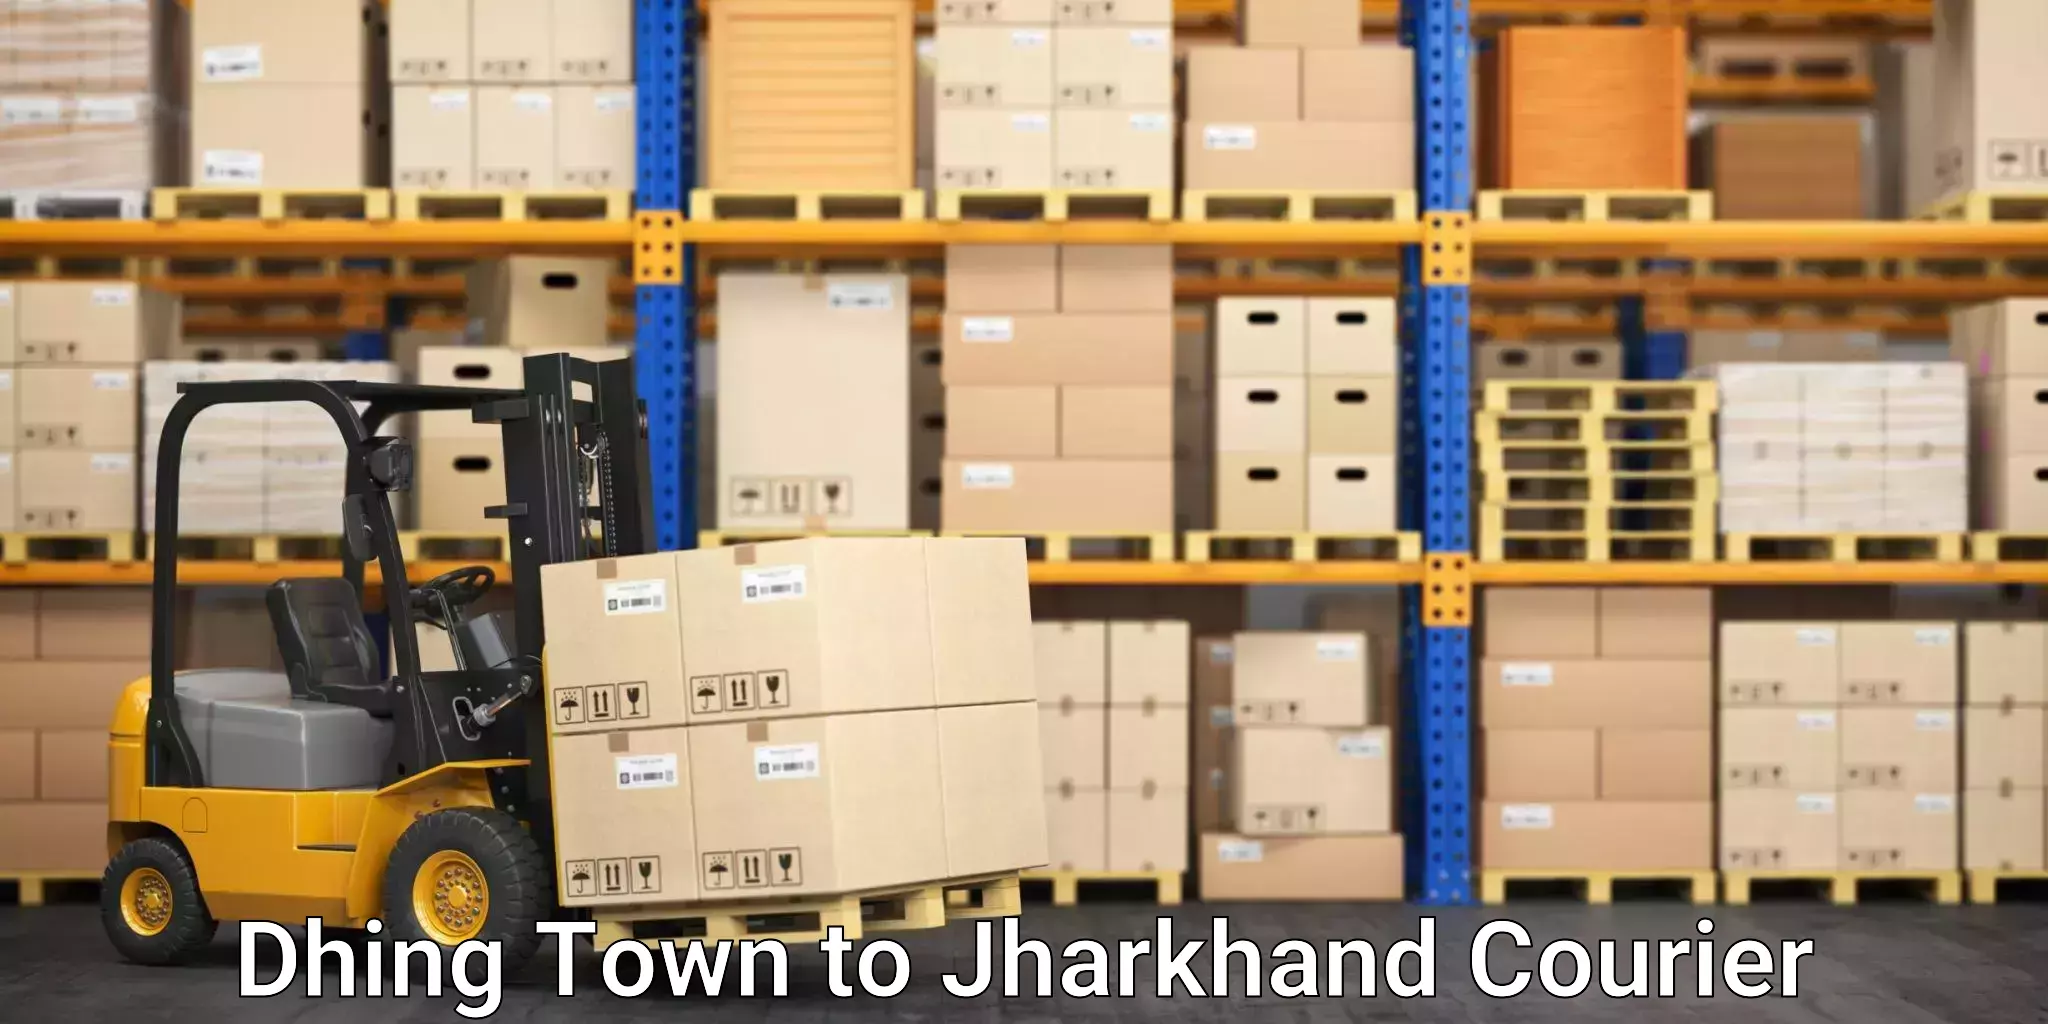 Affordable parcel service Dhing Town to Jharkhand